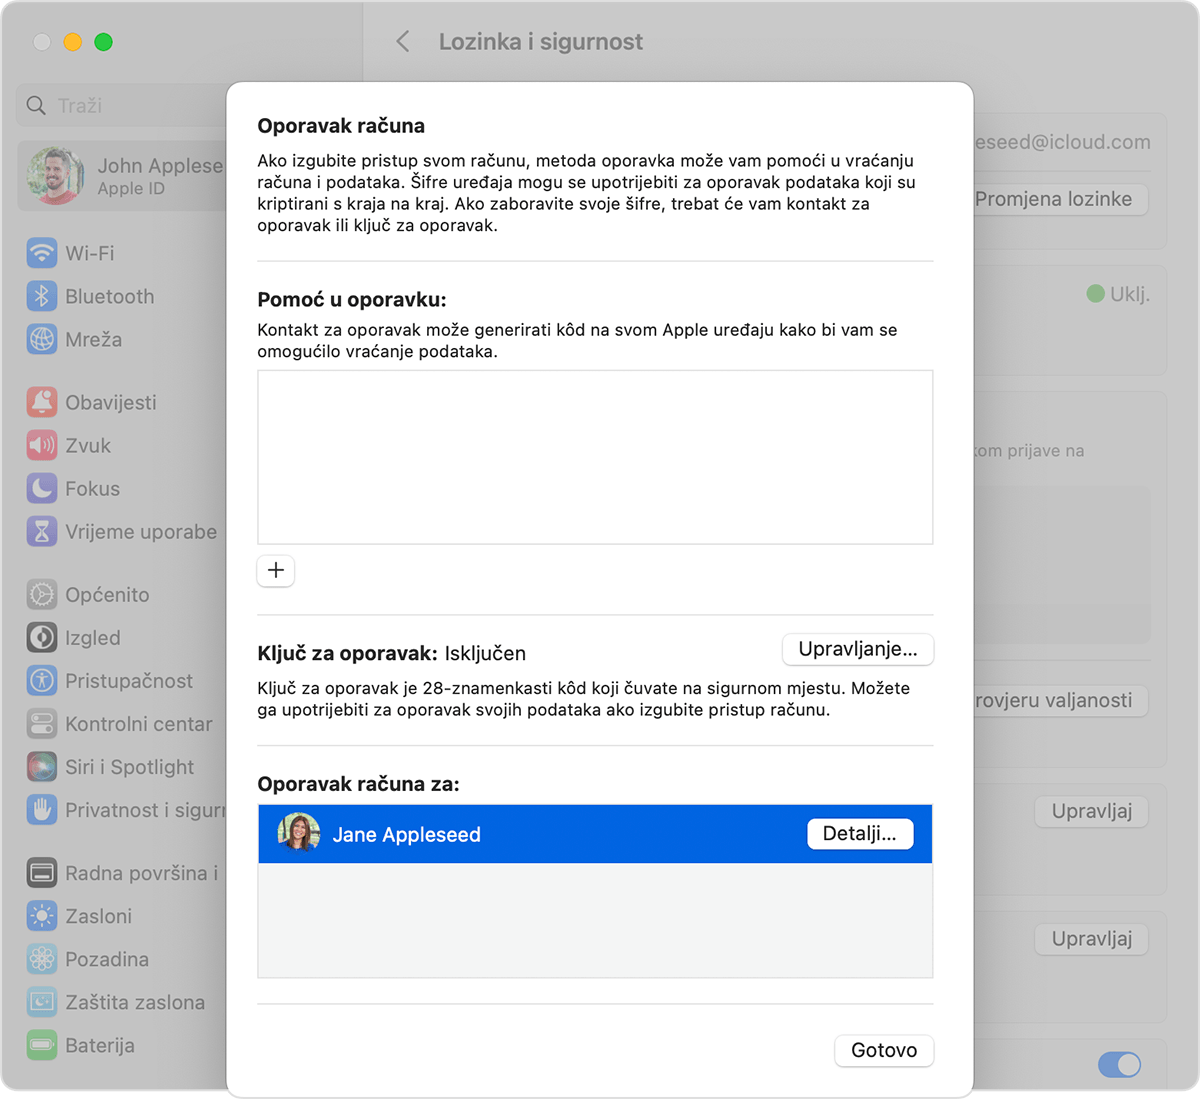 On Mac, get a recovery code for a friend or family member